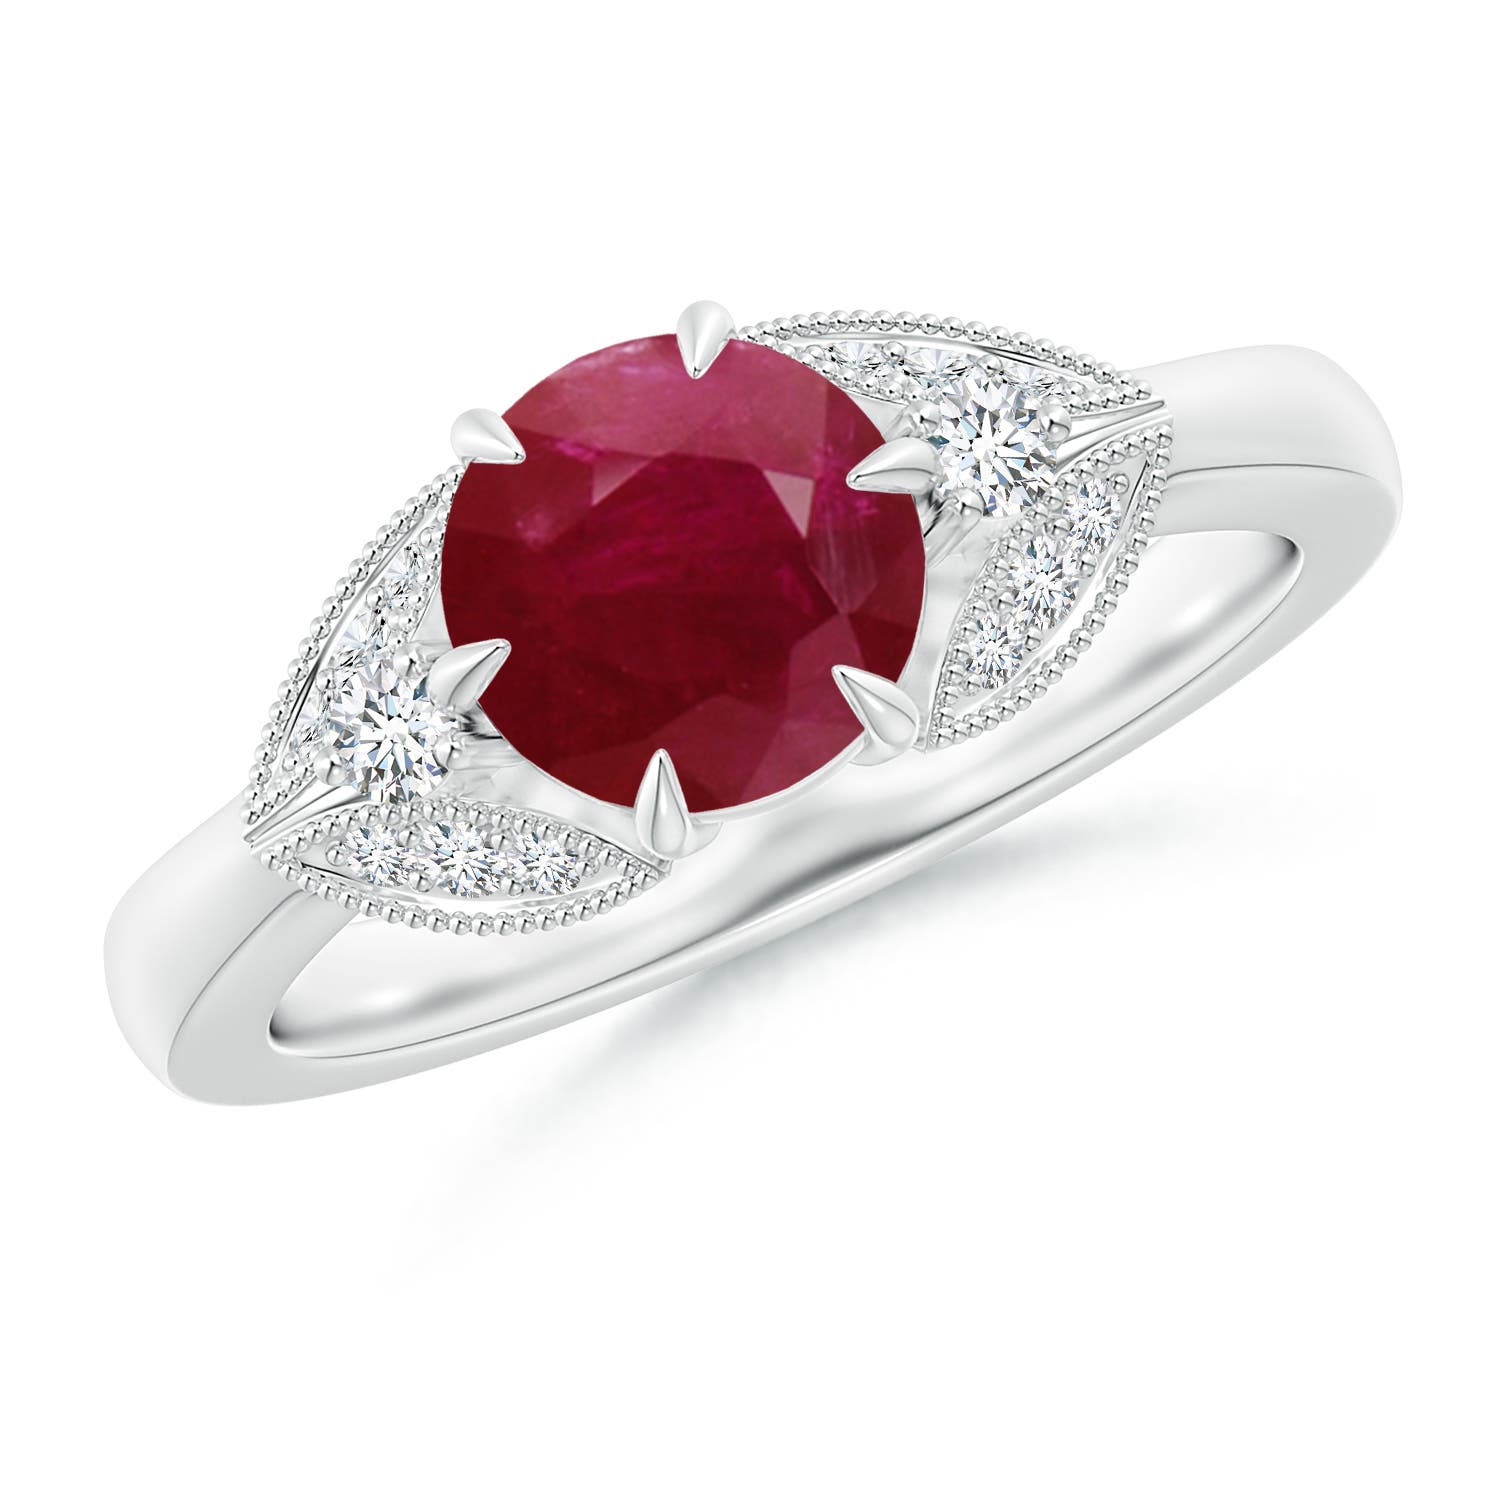 A - Ruby / 1.64 CT / 14 KT White Gold